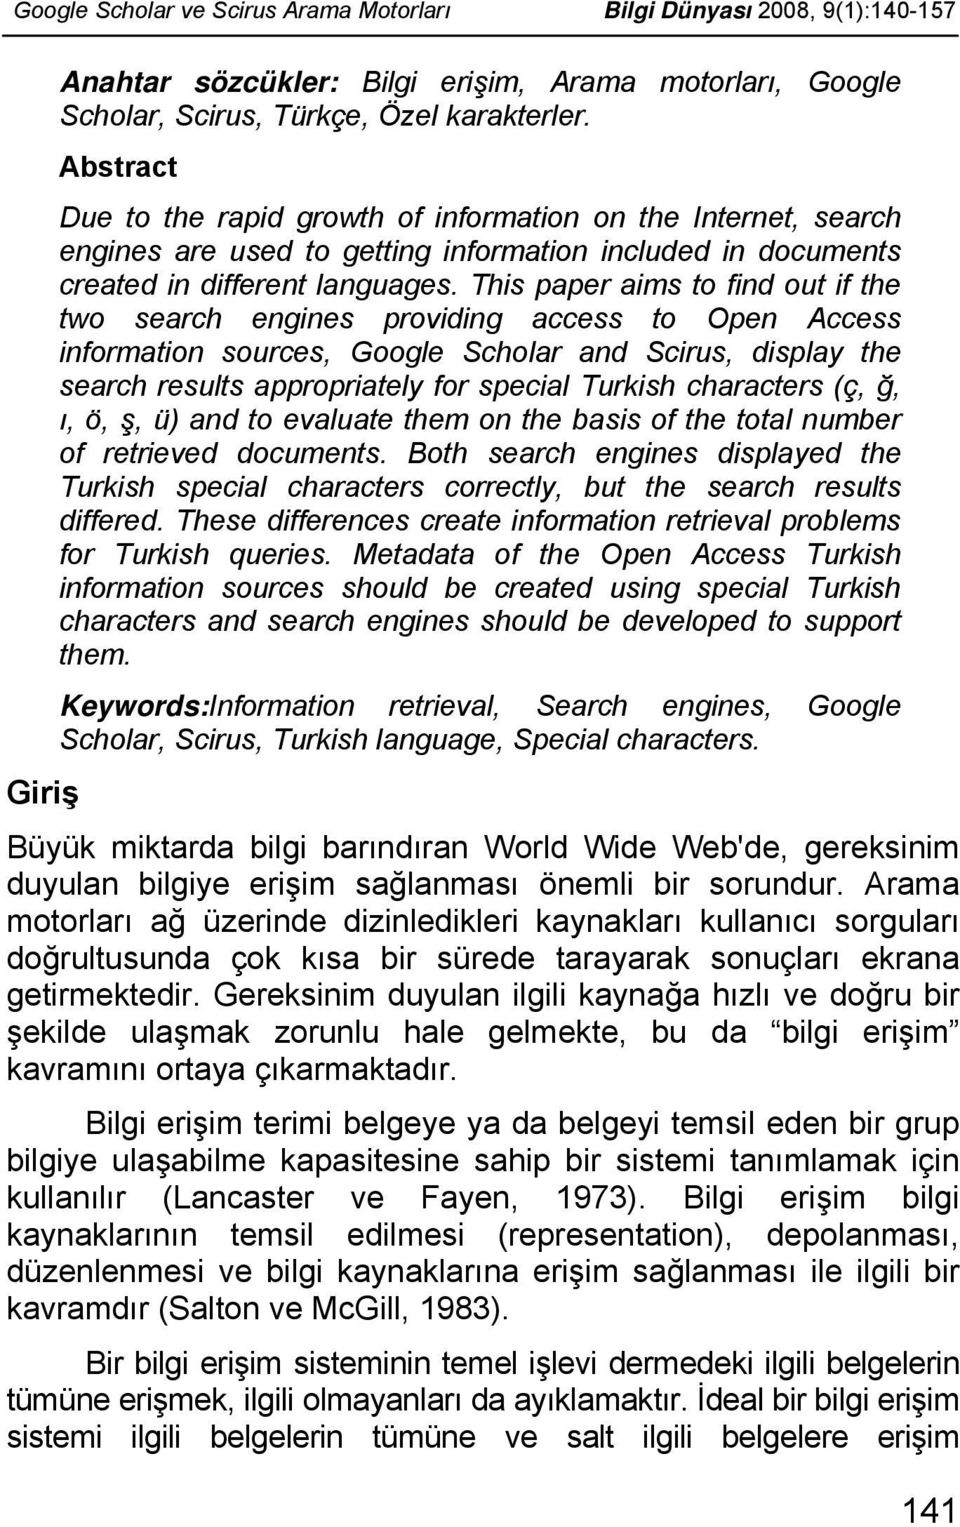 This paper aims to find out if the two search engines providing access to Open Access information sources, Google Scholar and Scirus, display the search results appropriately for special Turkish